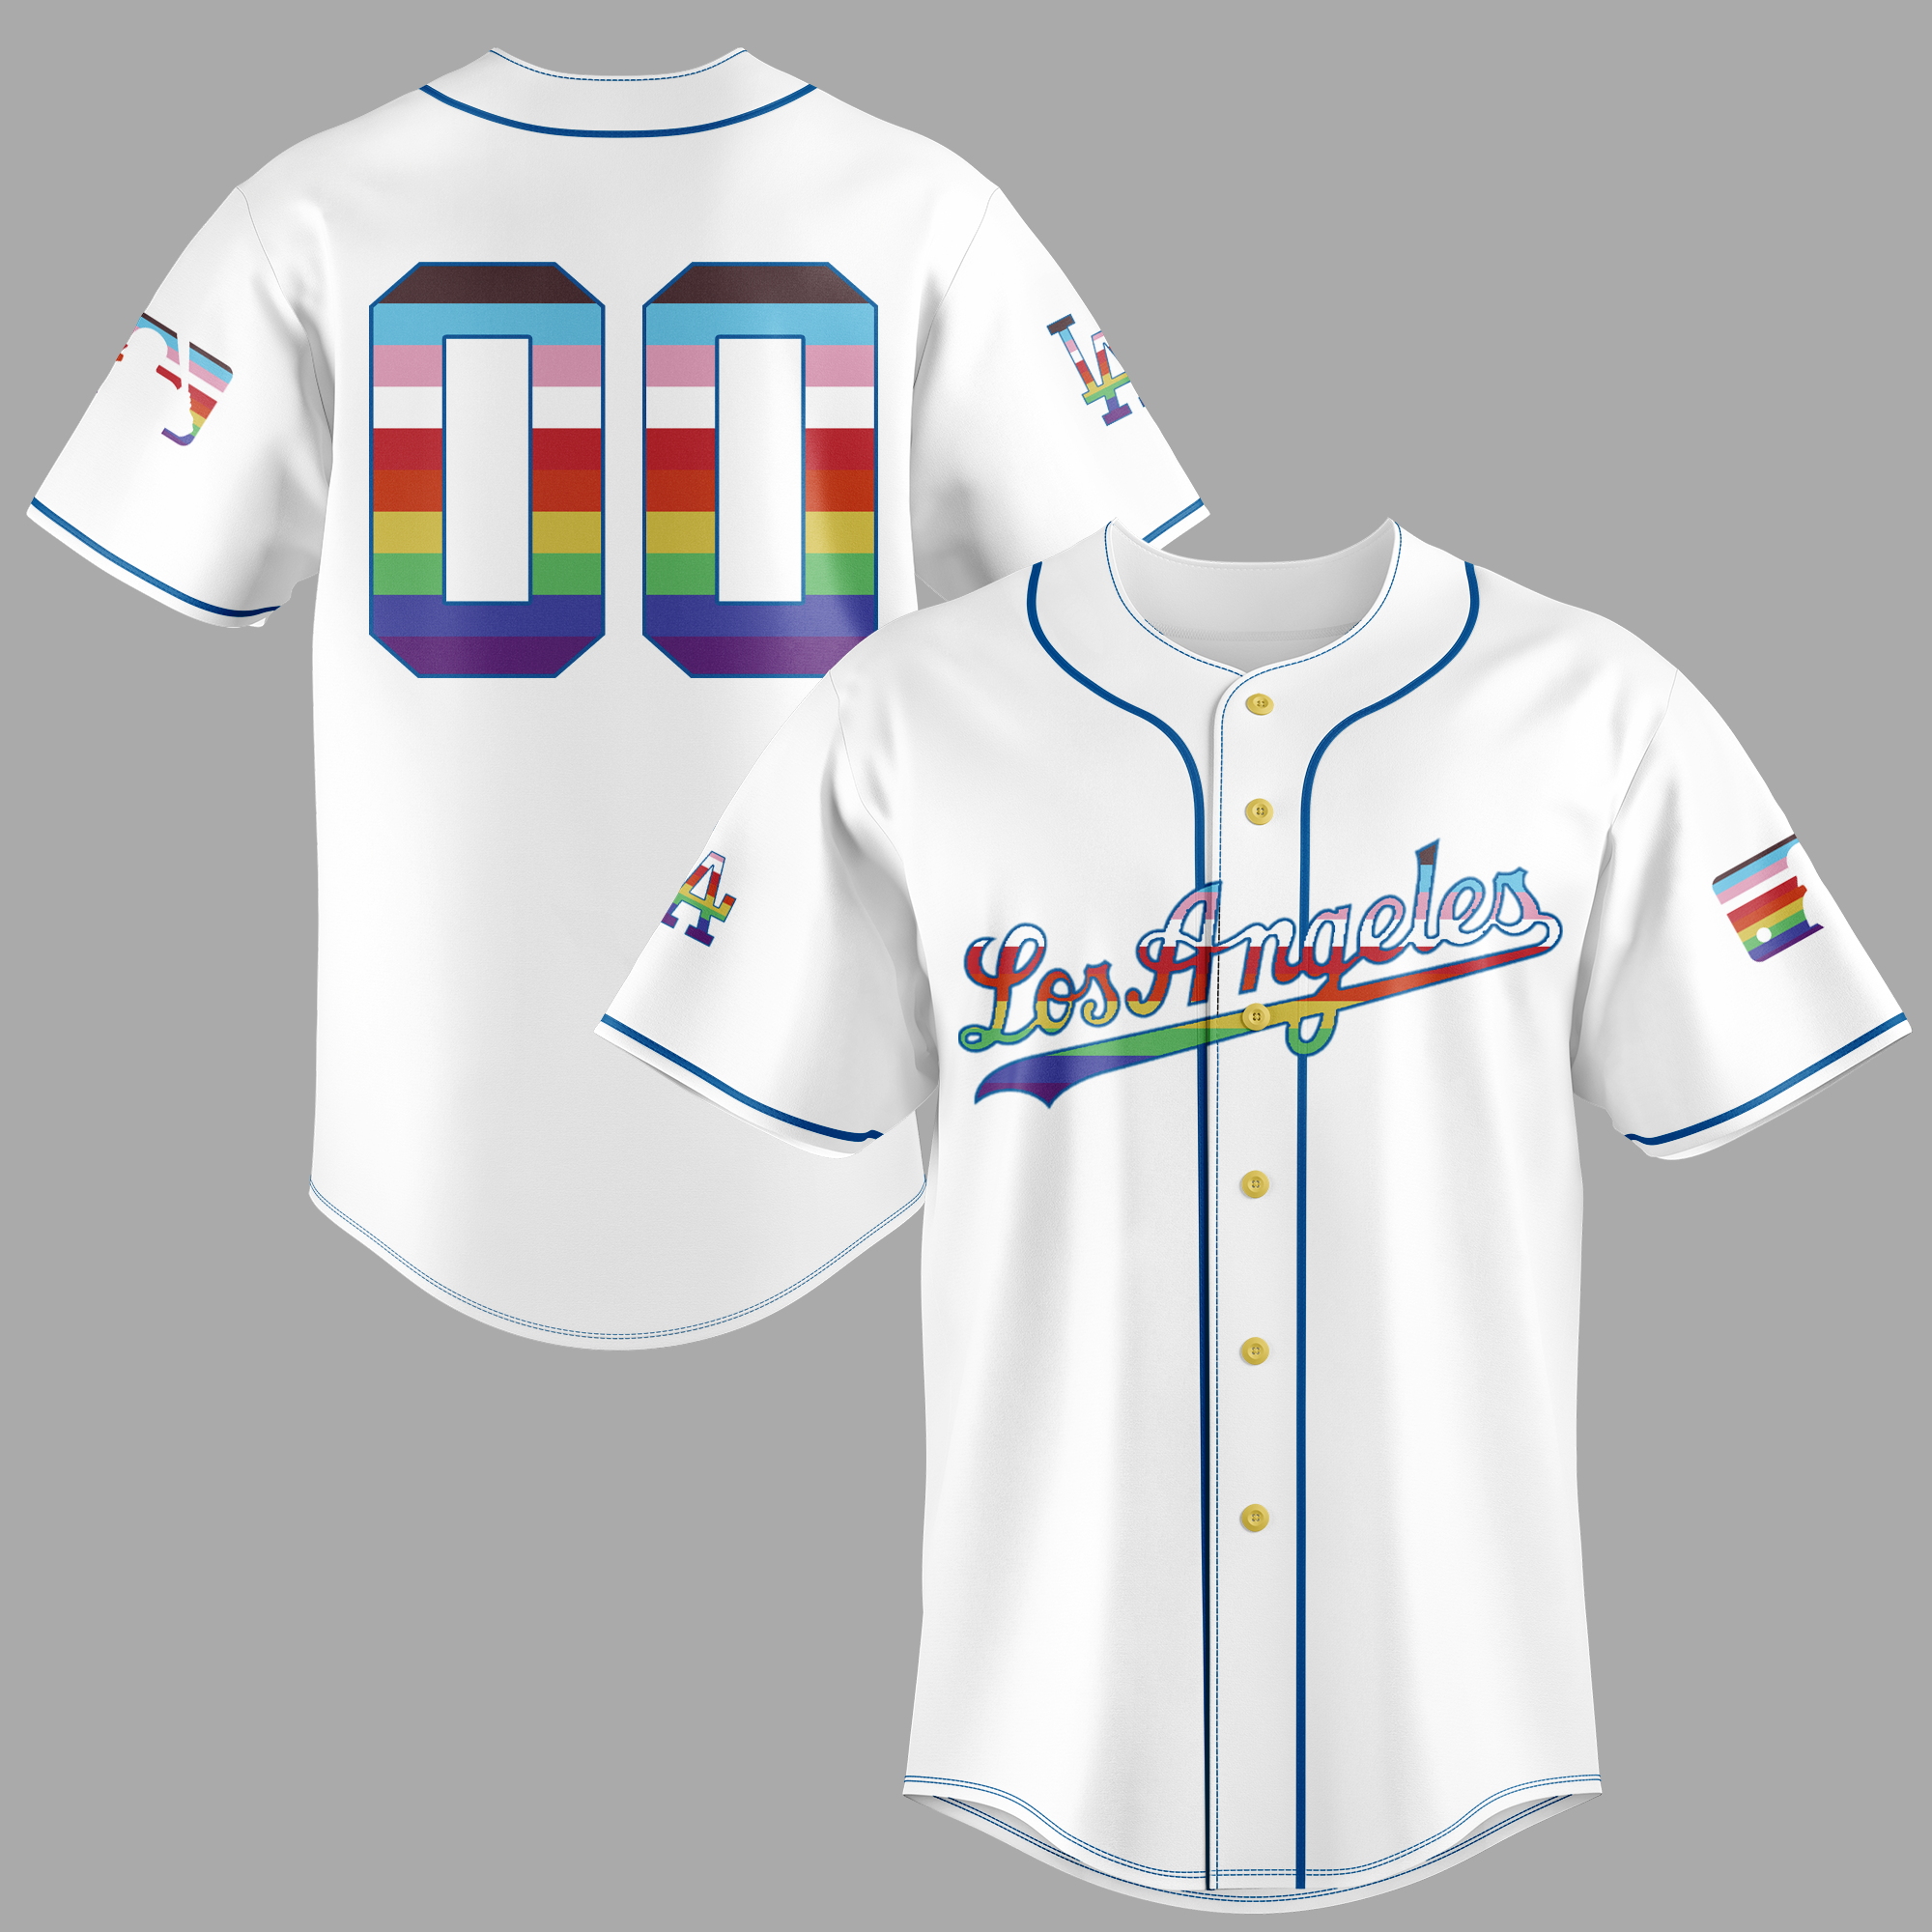 los angeles dodgers white jersey